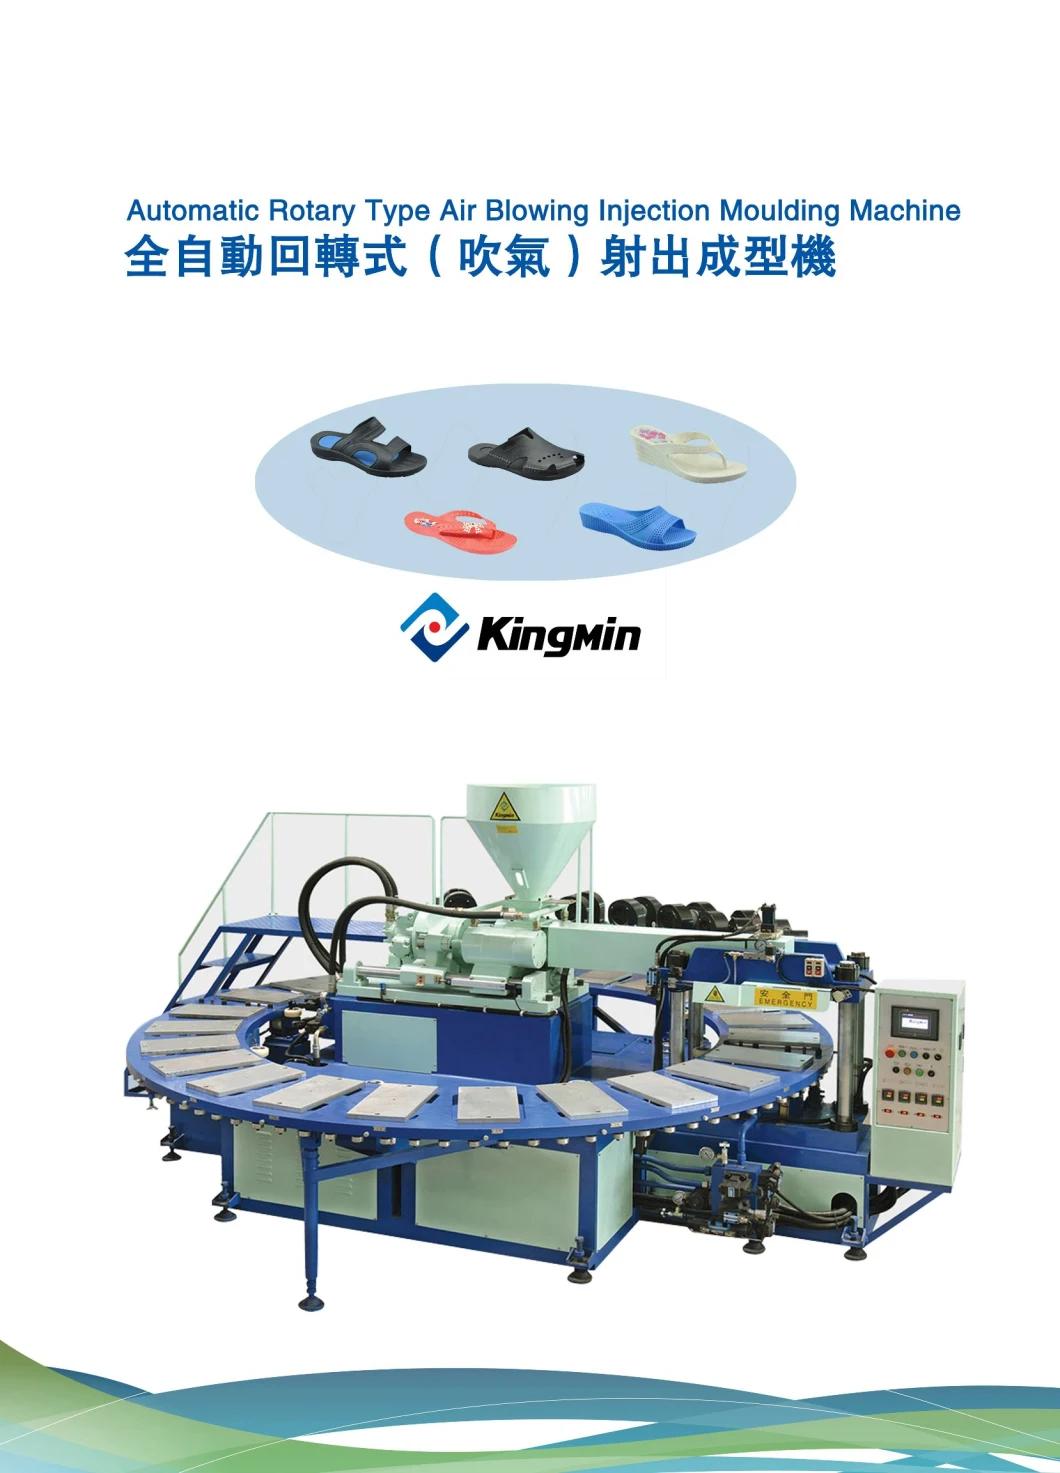 Kingmin Full Automatic Rotary Air Blowing Shoe Slippers Injection Molding Machine